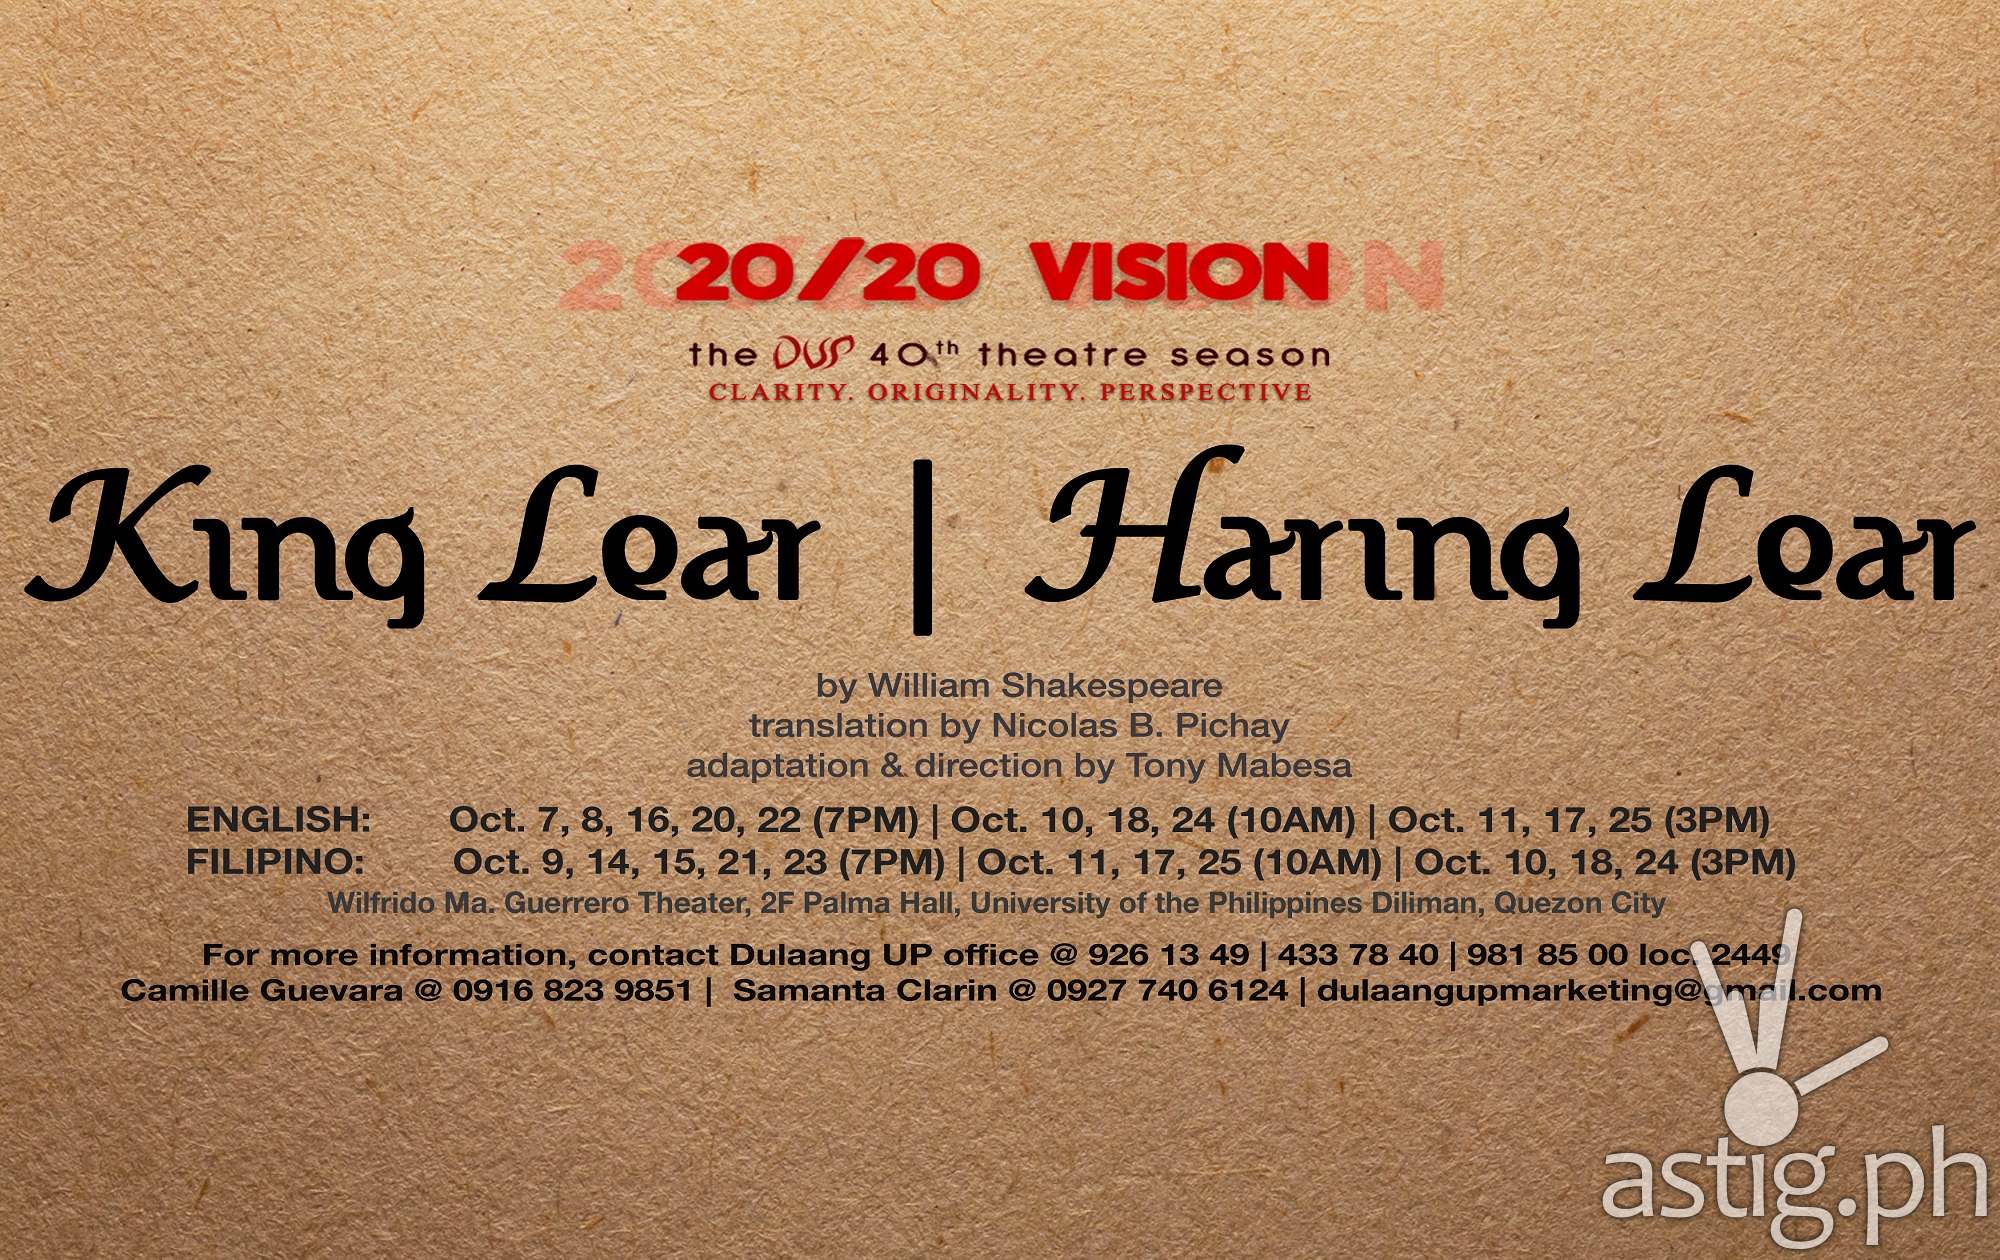 King Lear | Haring Lear by Dulaang UP